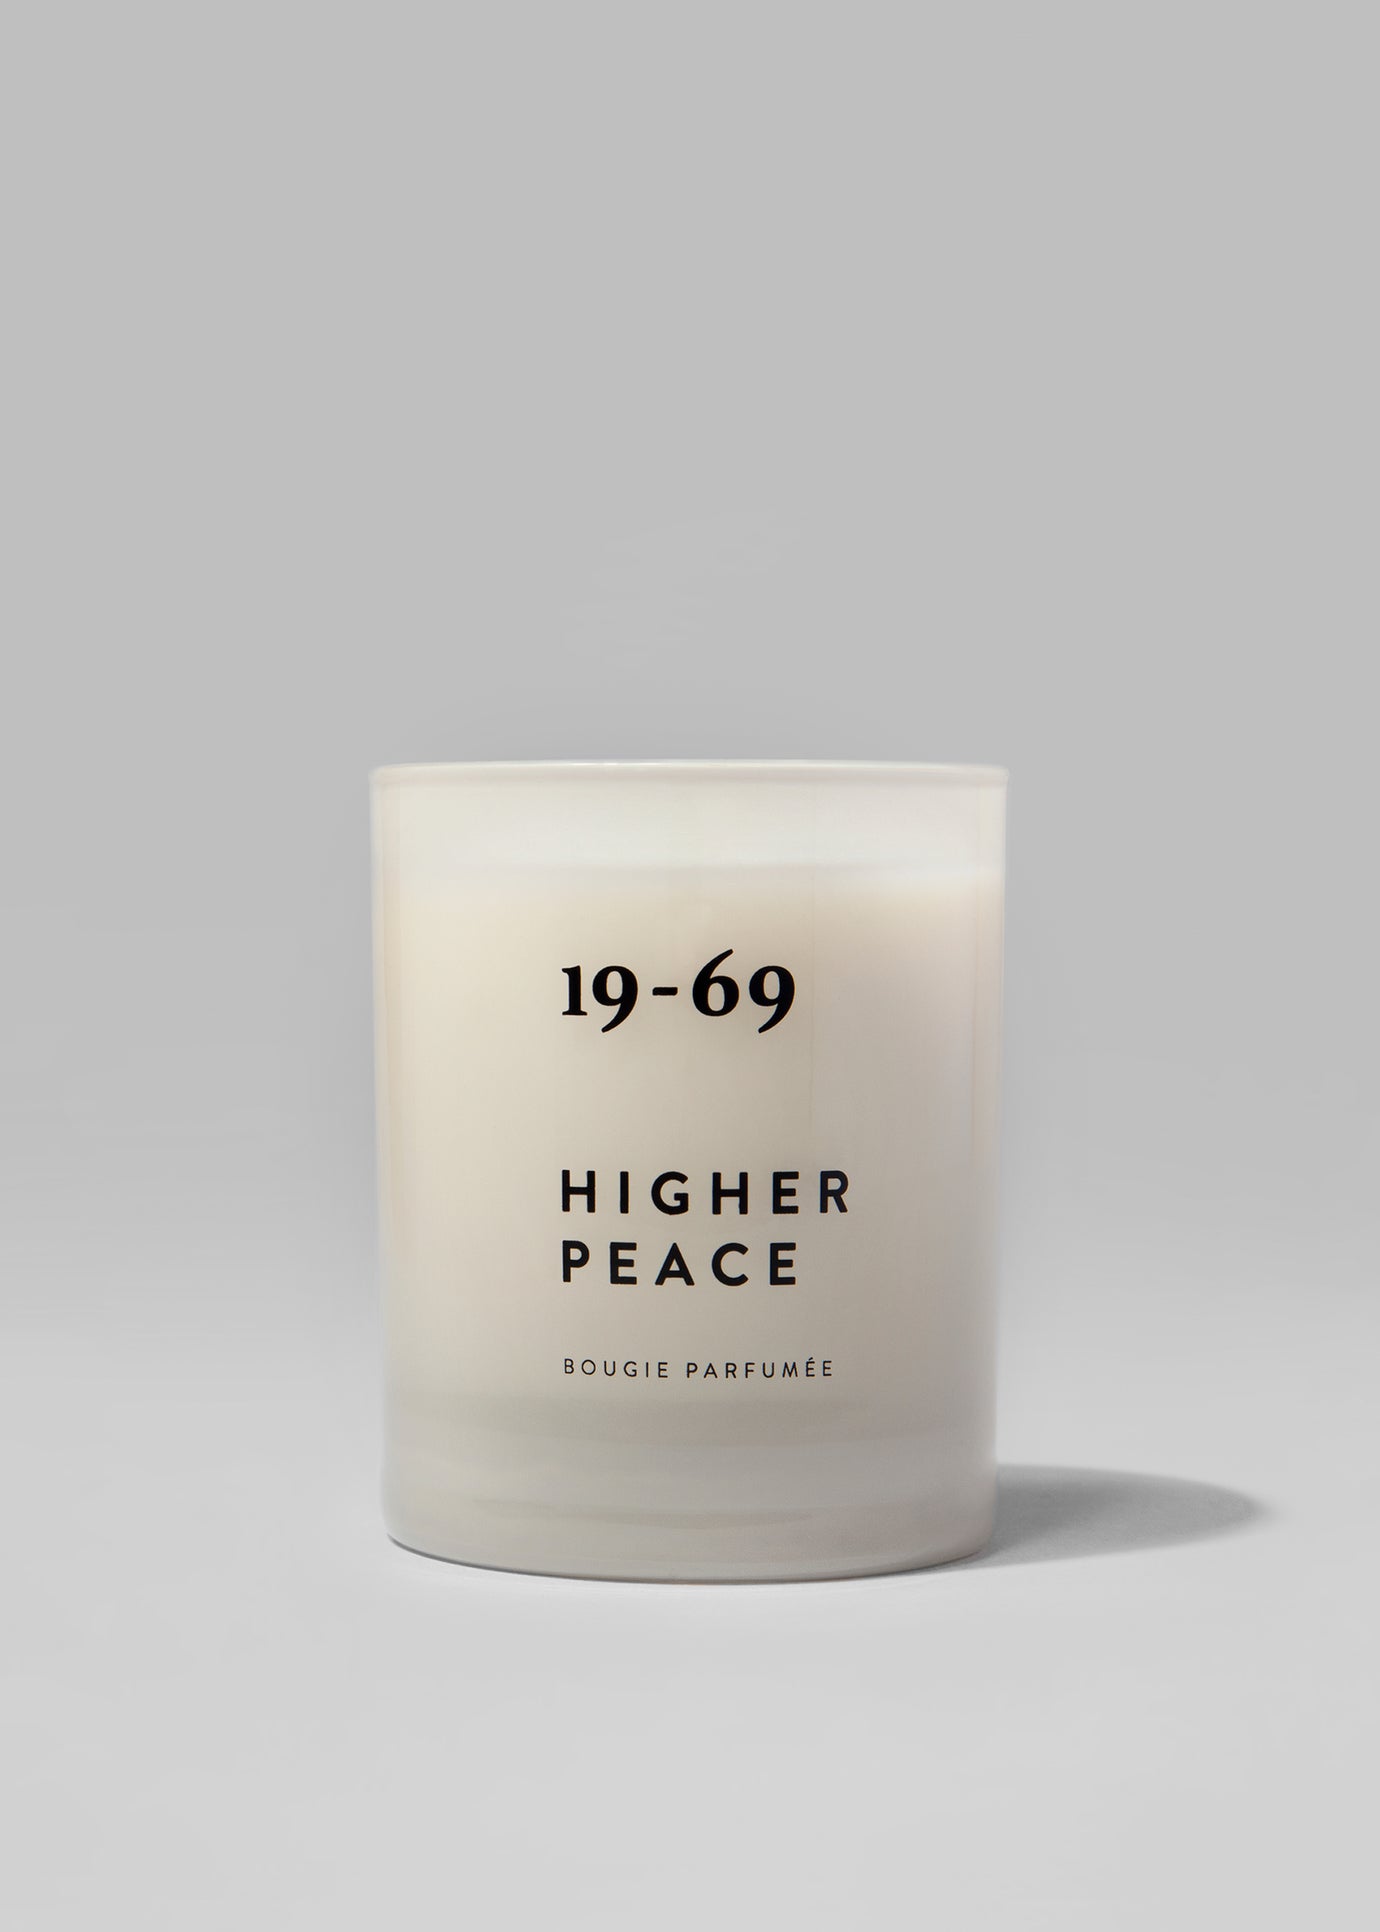 19-69 Higher Peace Candle